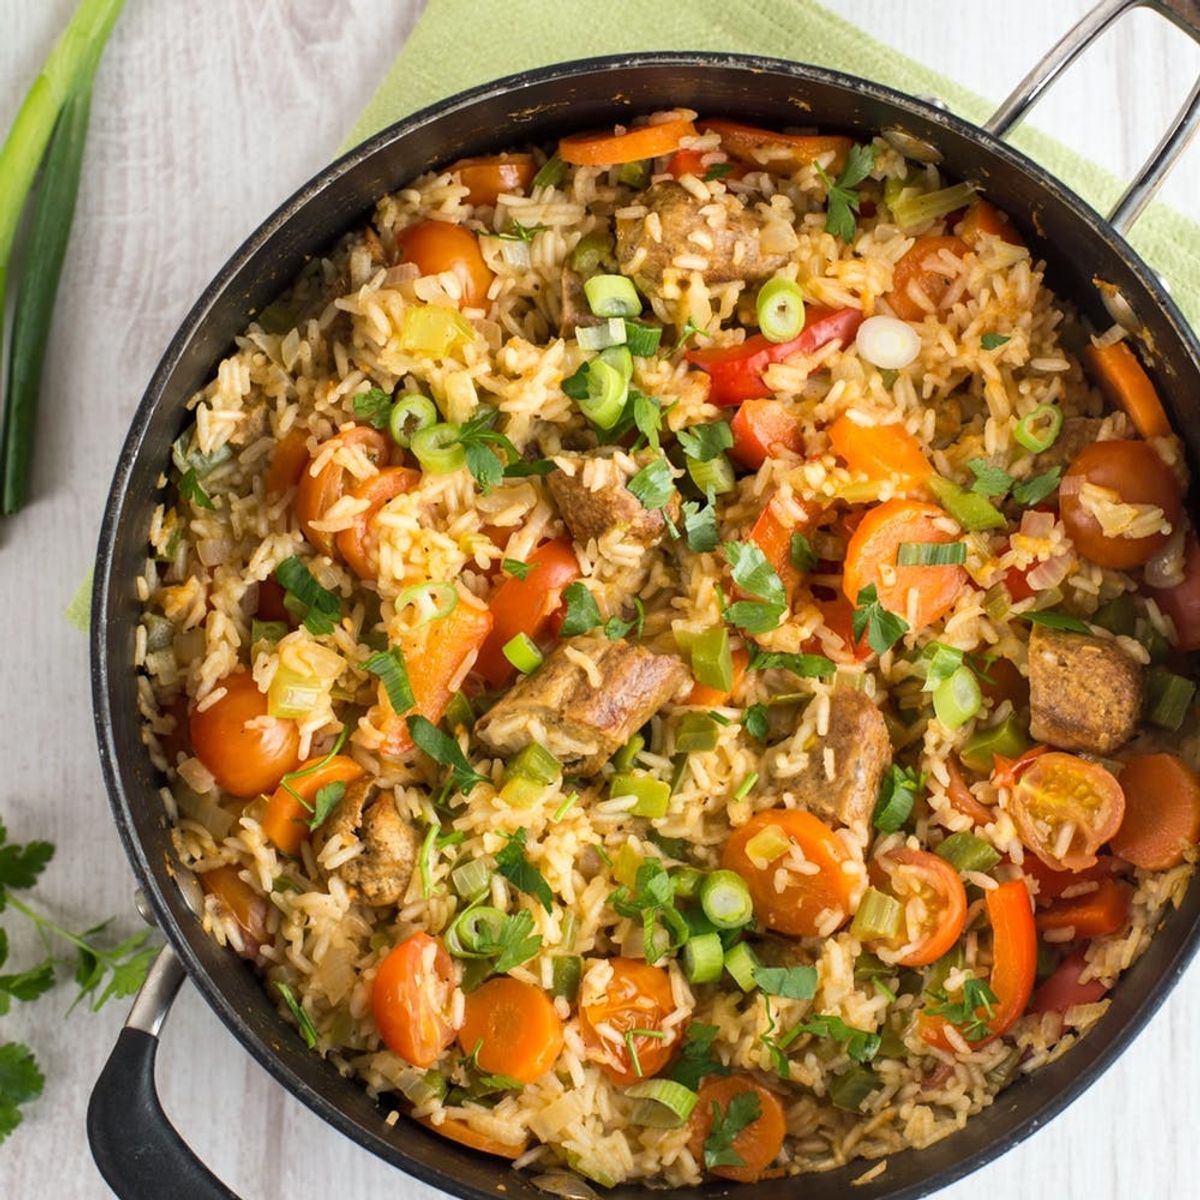 Spice Up Your Mardi Gras With This Easy Jambalaya Recipe